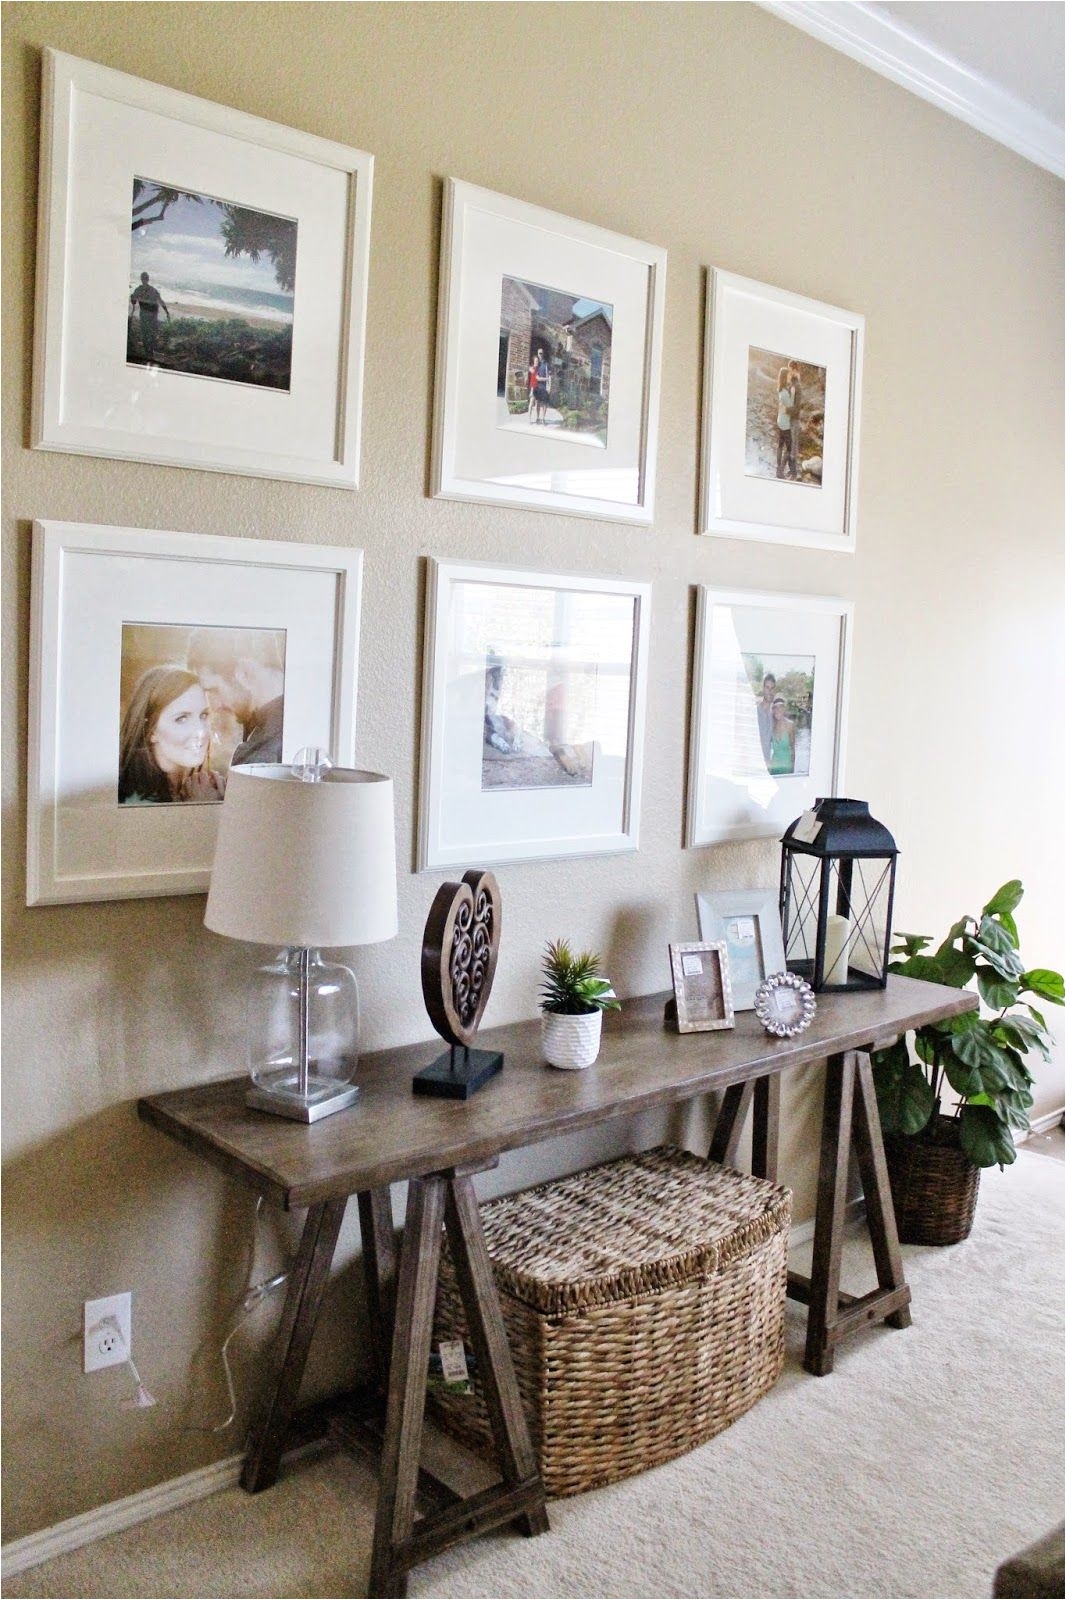 entry way living room decor ikea picture frame gallery wall sofa table decor tucker up blog